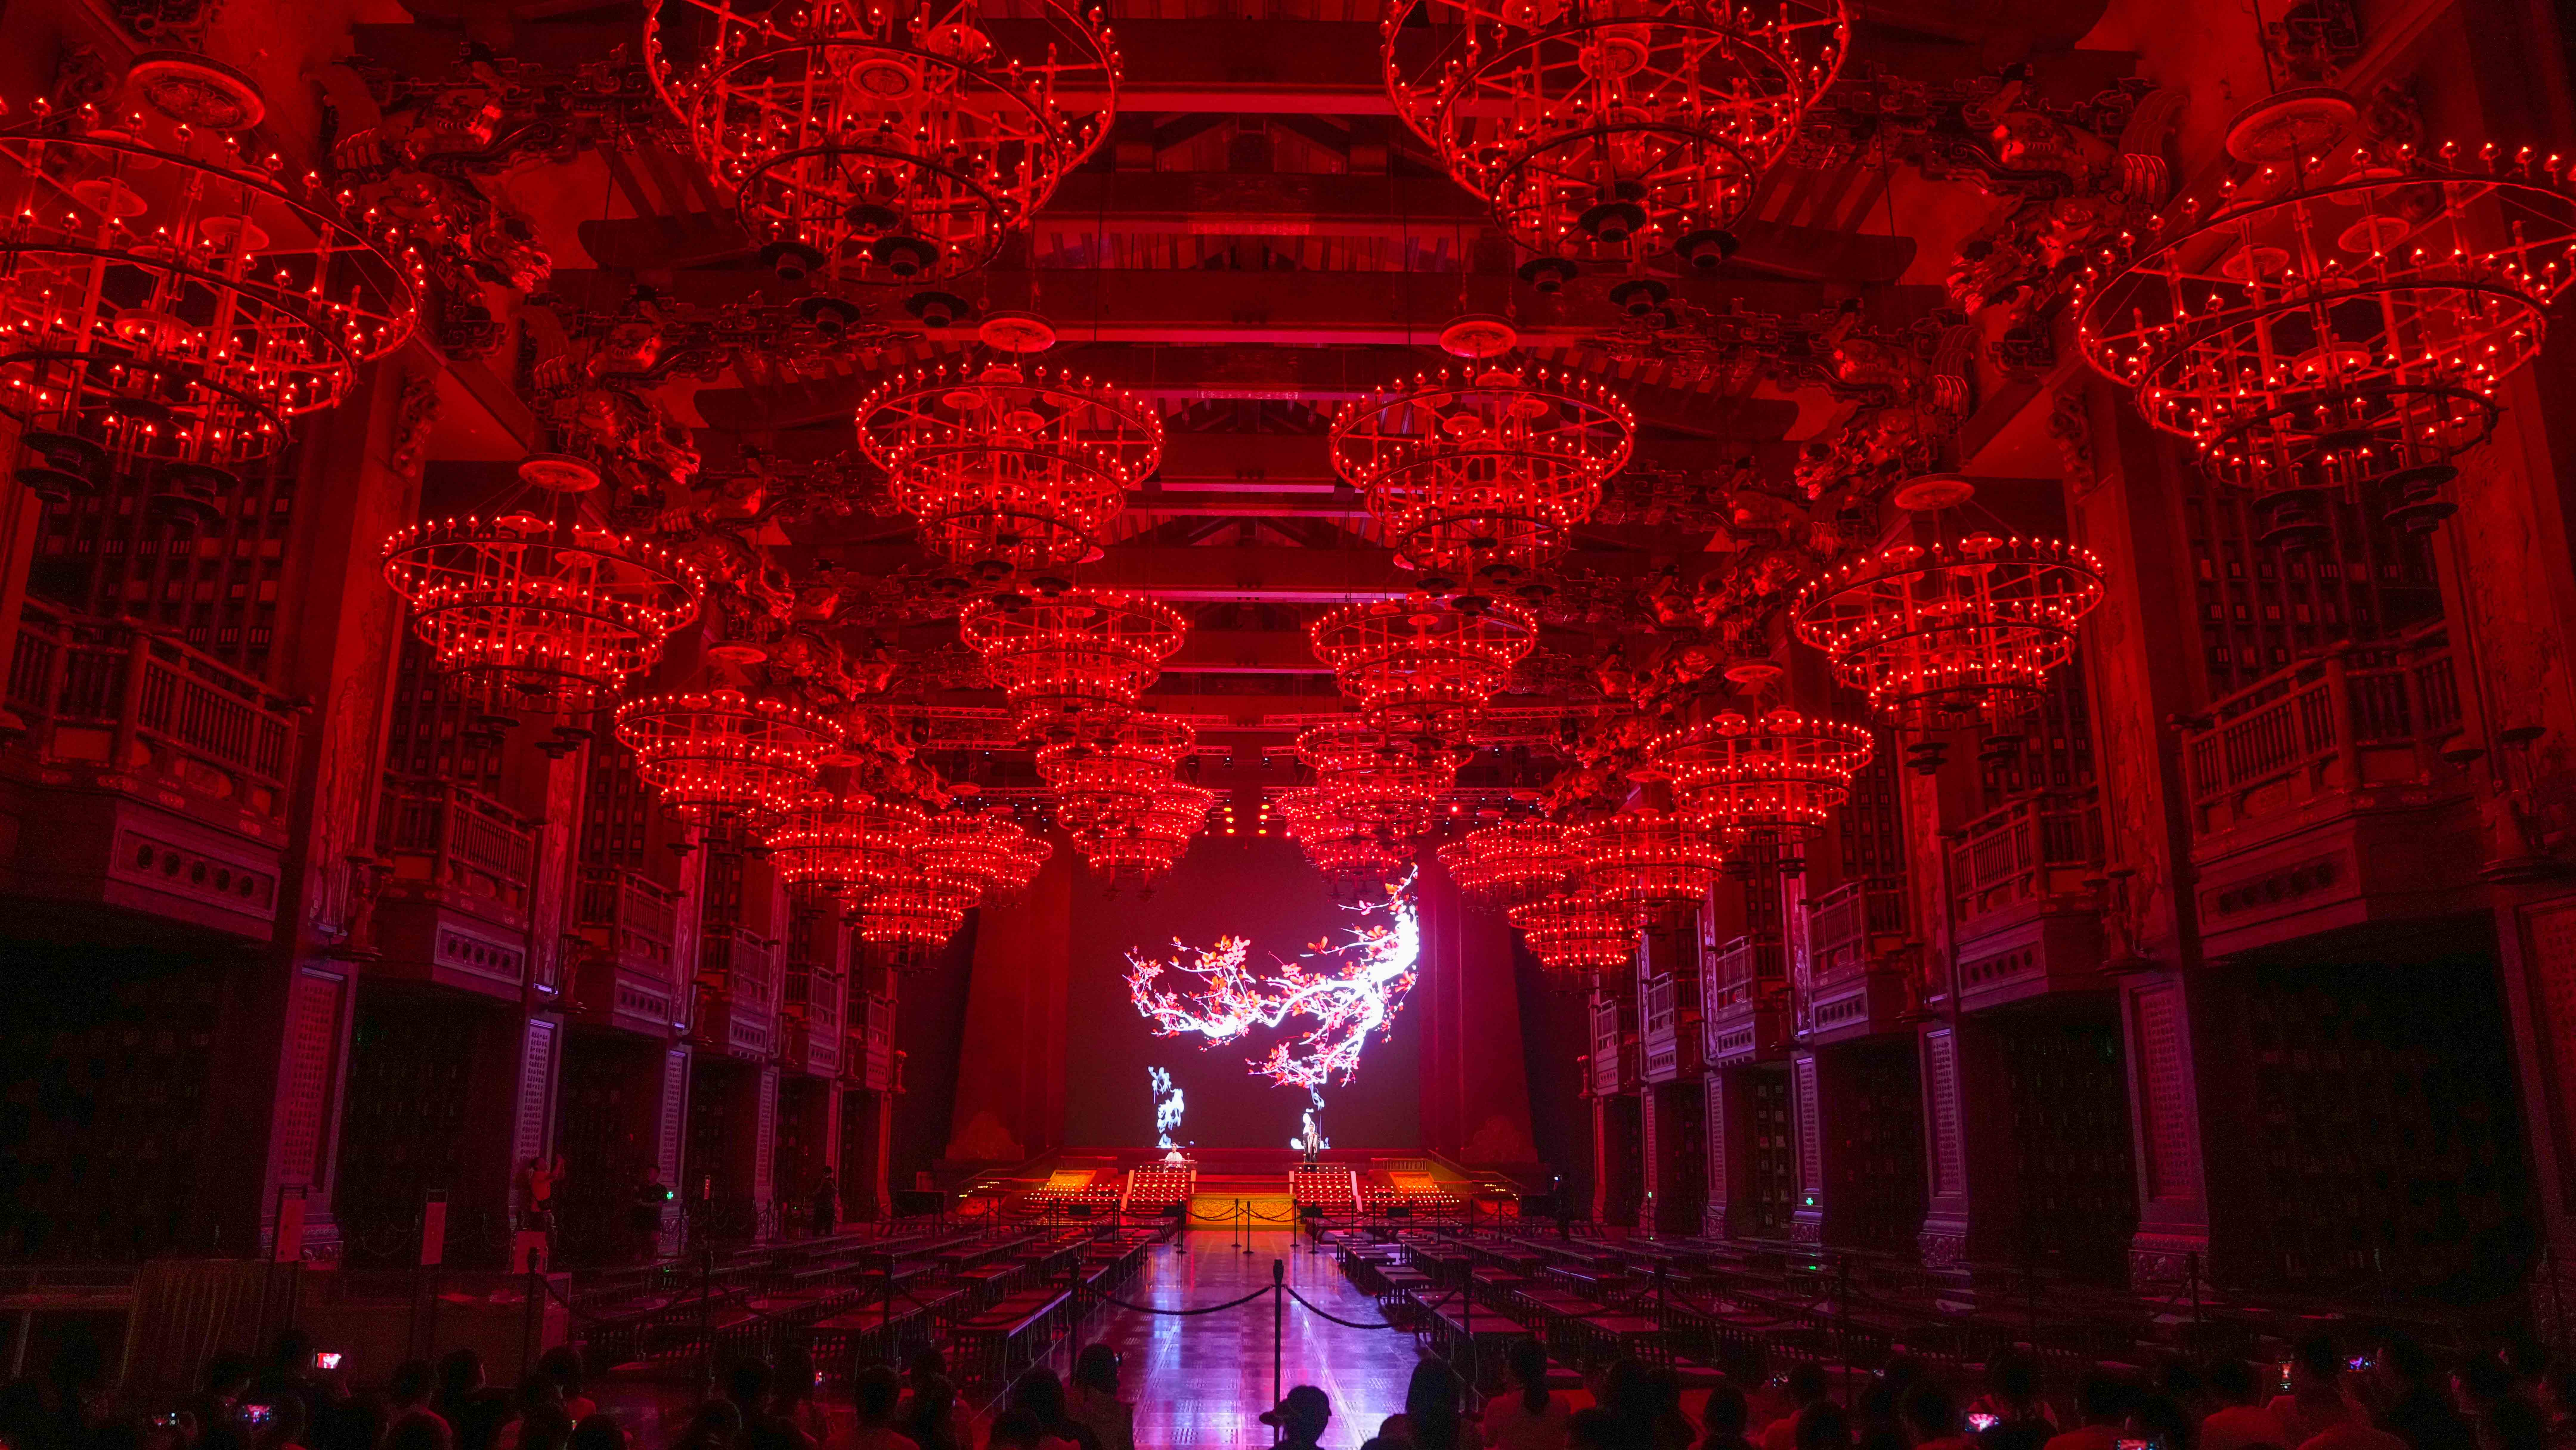 Light show 'All for Benevolence' staged at Nishan Sacred Land in Qufu